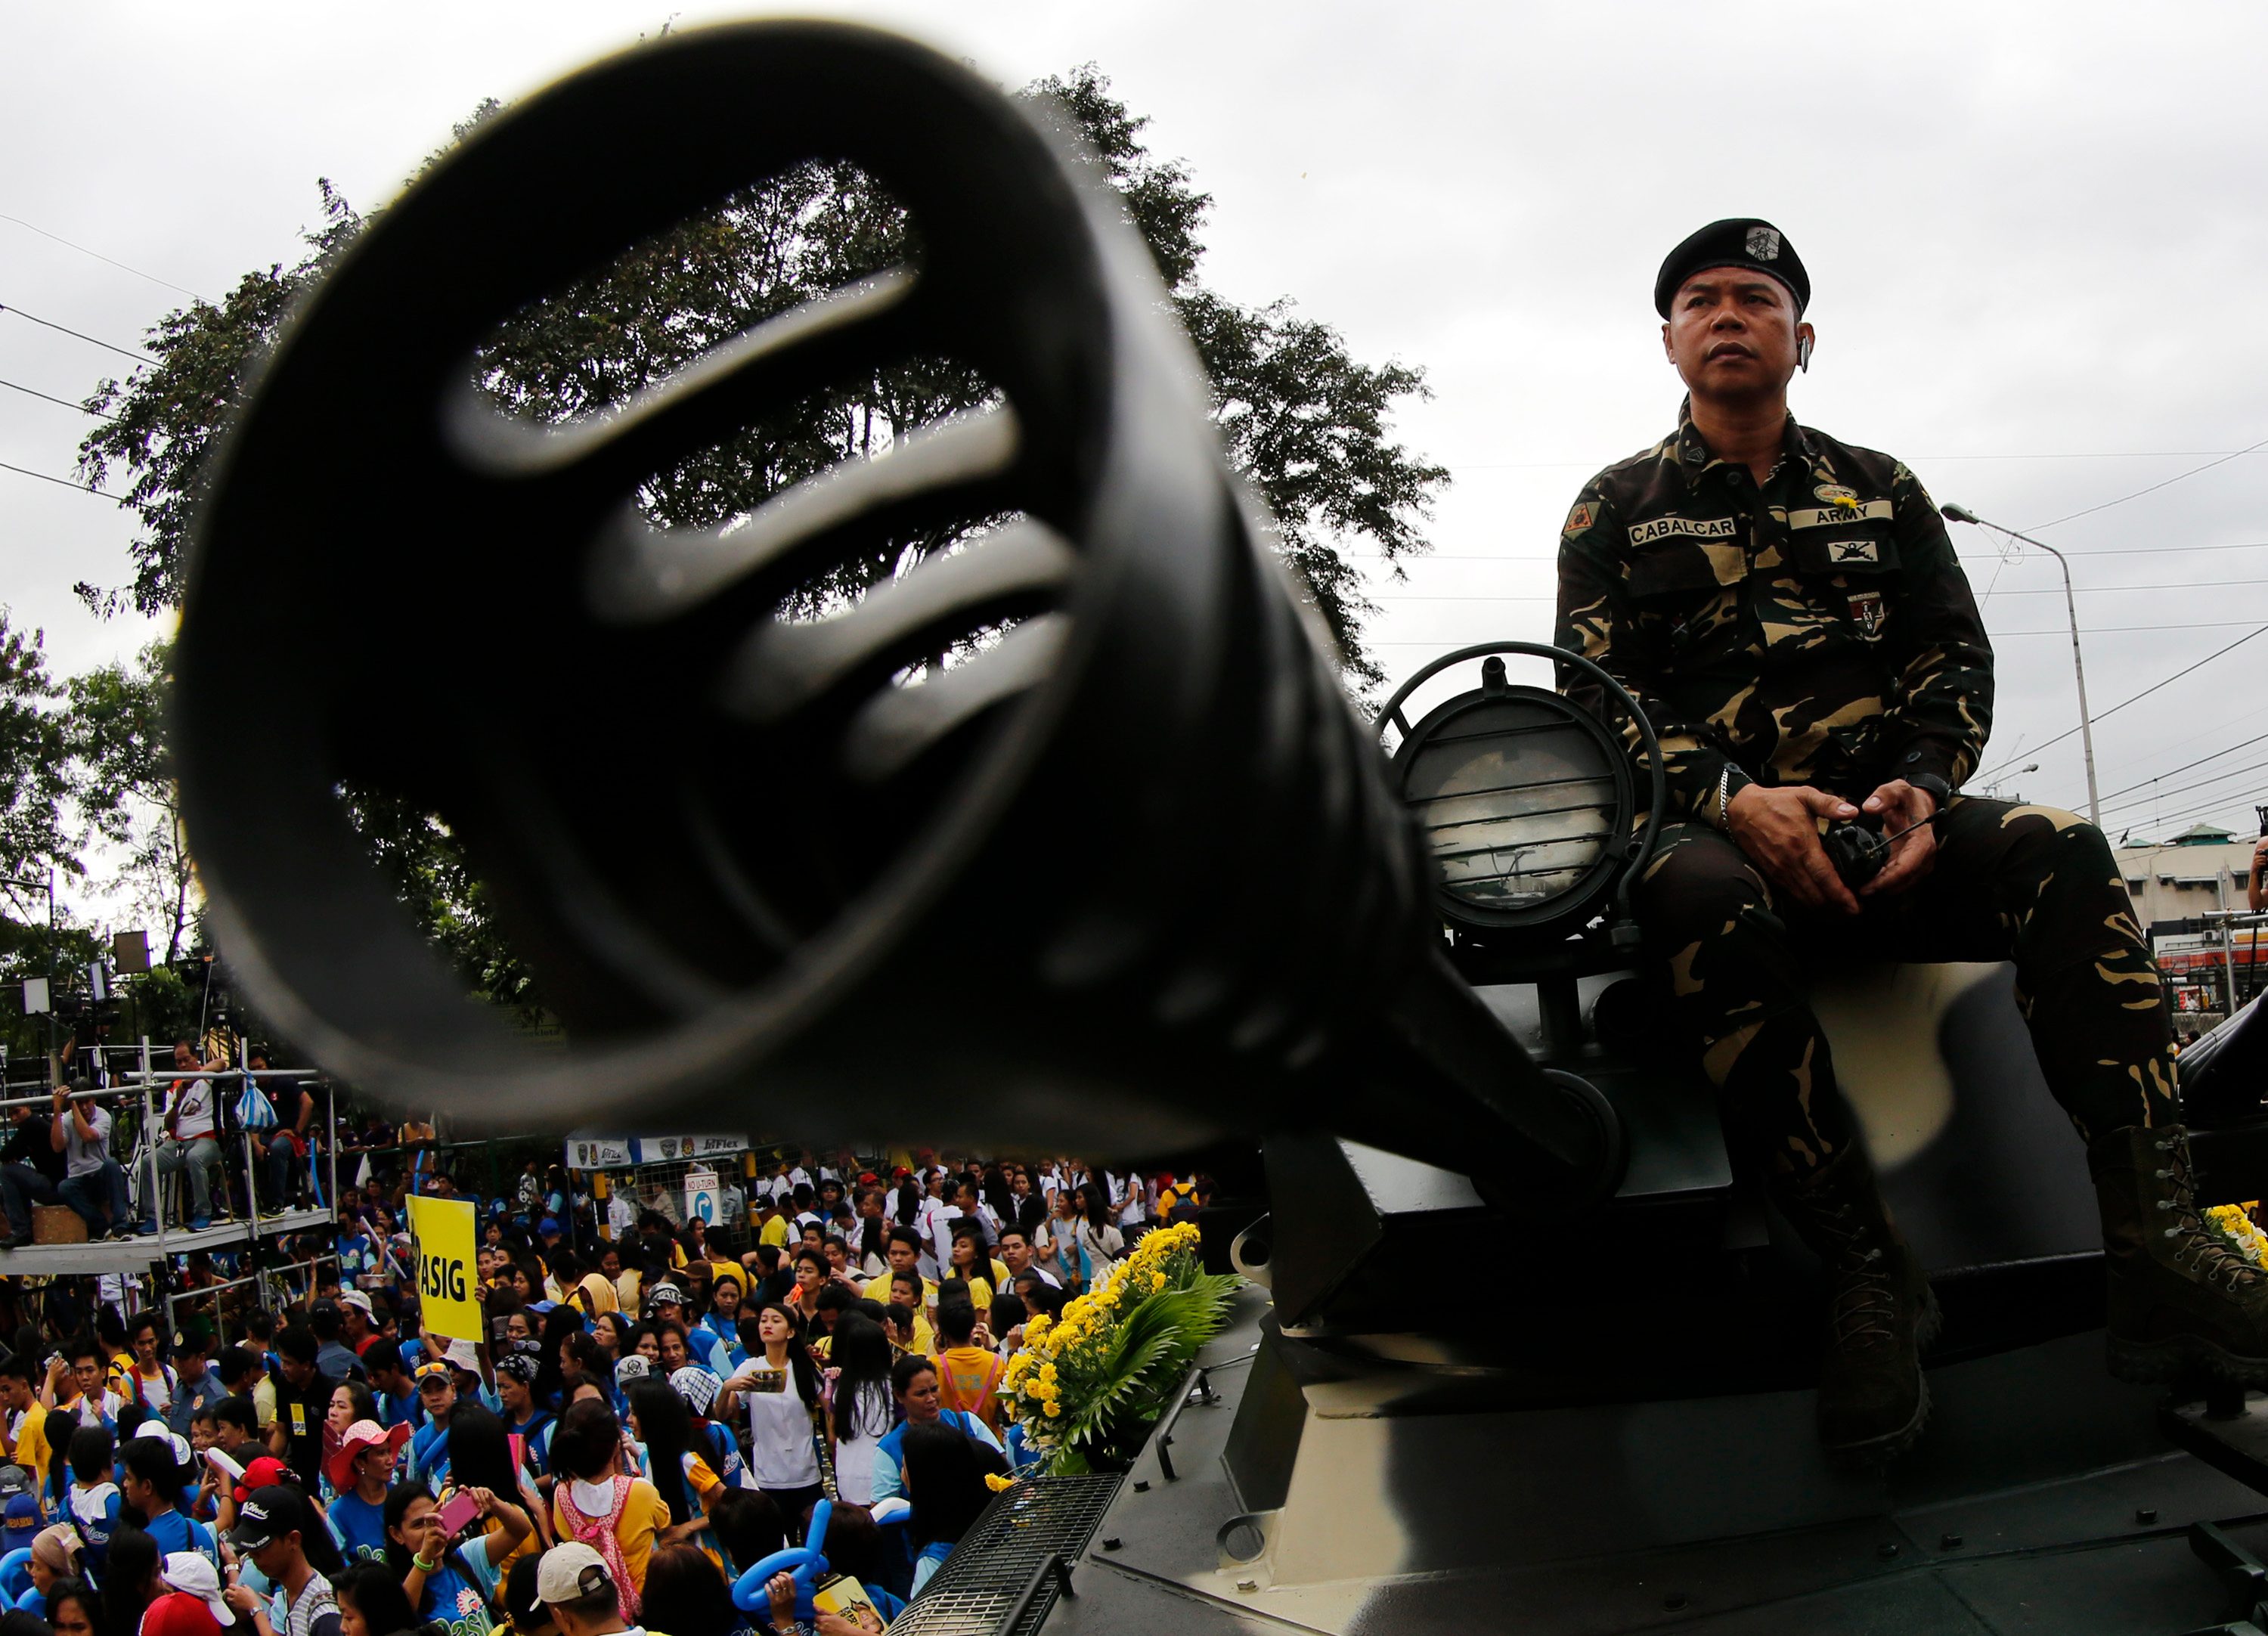 30 YEARS LATER. In a re-enactment of the People Power Revolution of 1986, a Filipino soldier sits on top of a military tank during the 30th anniversary of the fall of the dictatorship of Ferdinand Marcos, at the People Power monument in Quezon City, on February 25, 2016. Photo by Francis Malasig/EPA 